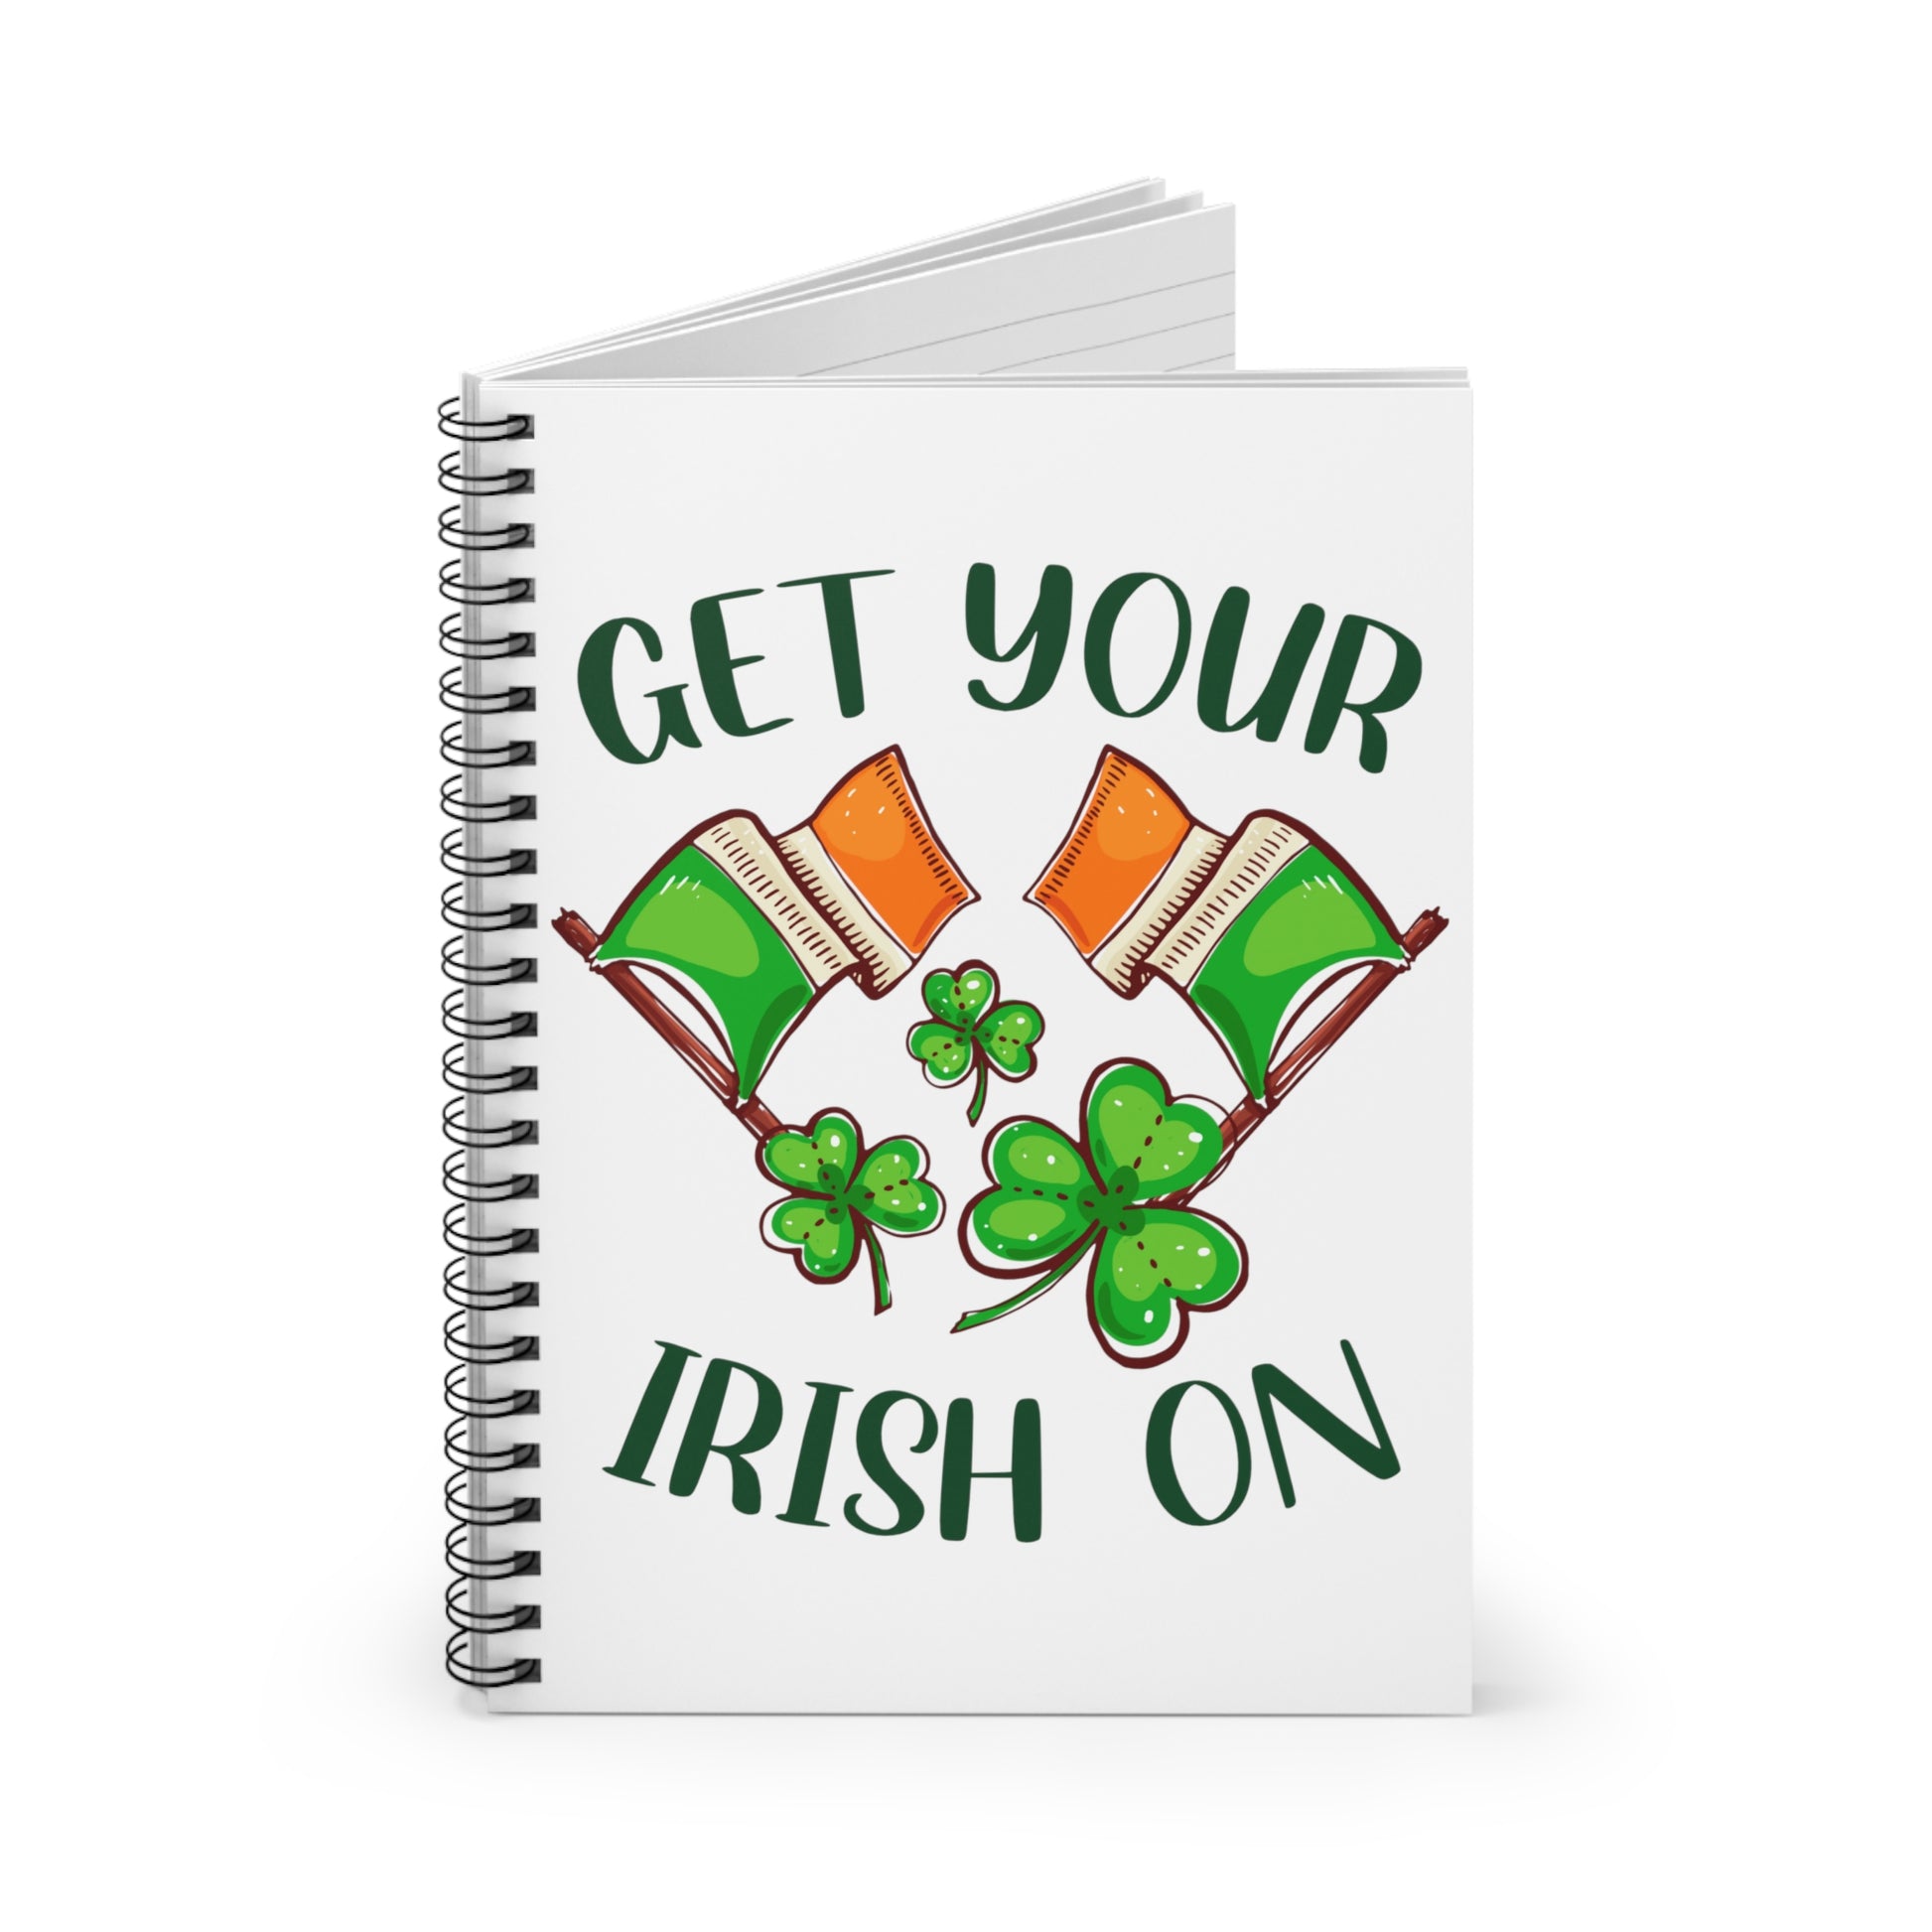 Get Your Irish On: Spiral Notebook - Log Books - Journals - Diaries - and More Custom Printed by TheGlassyLass